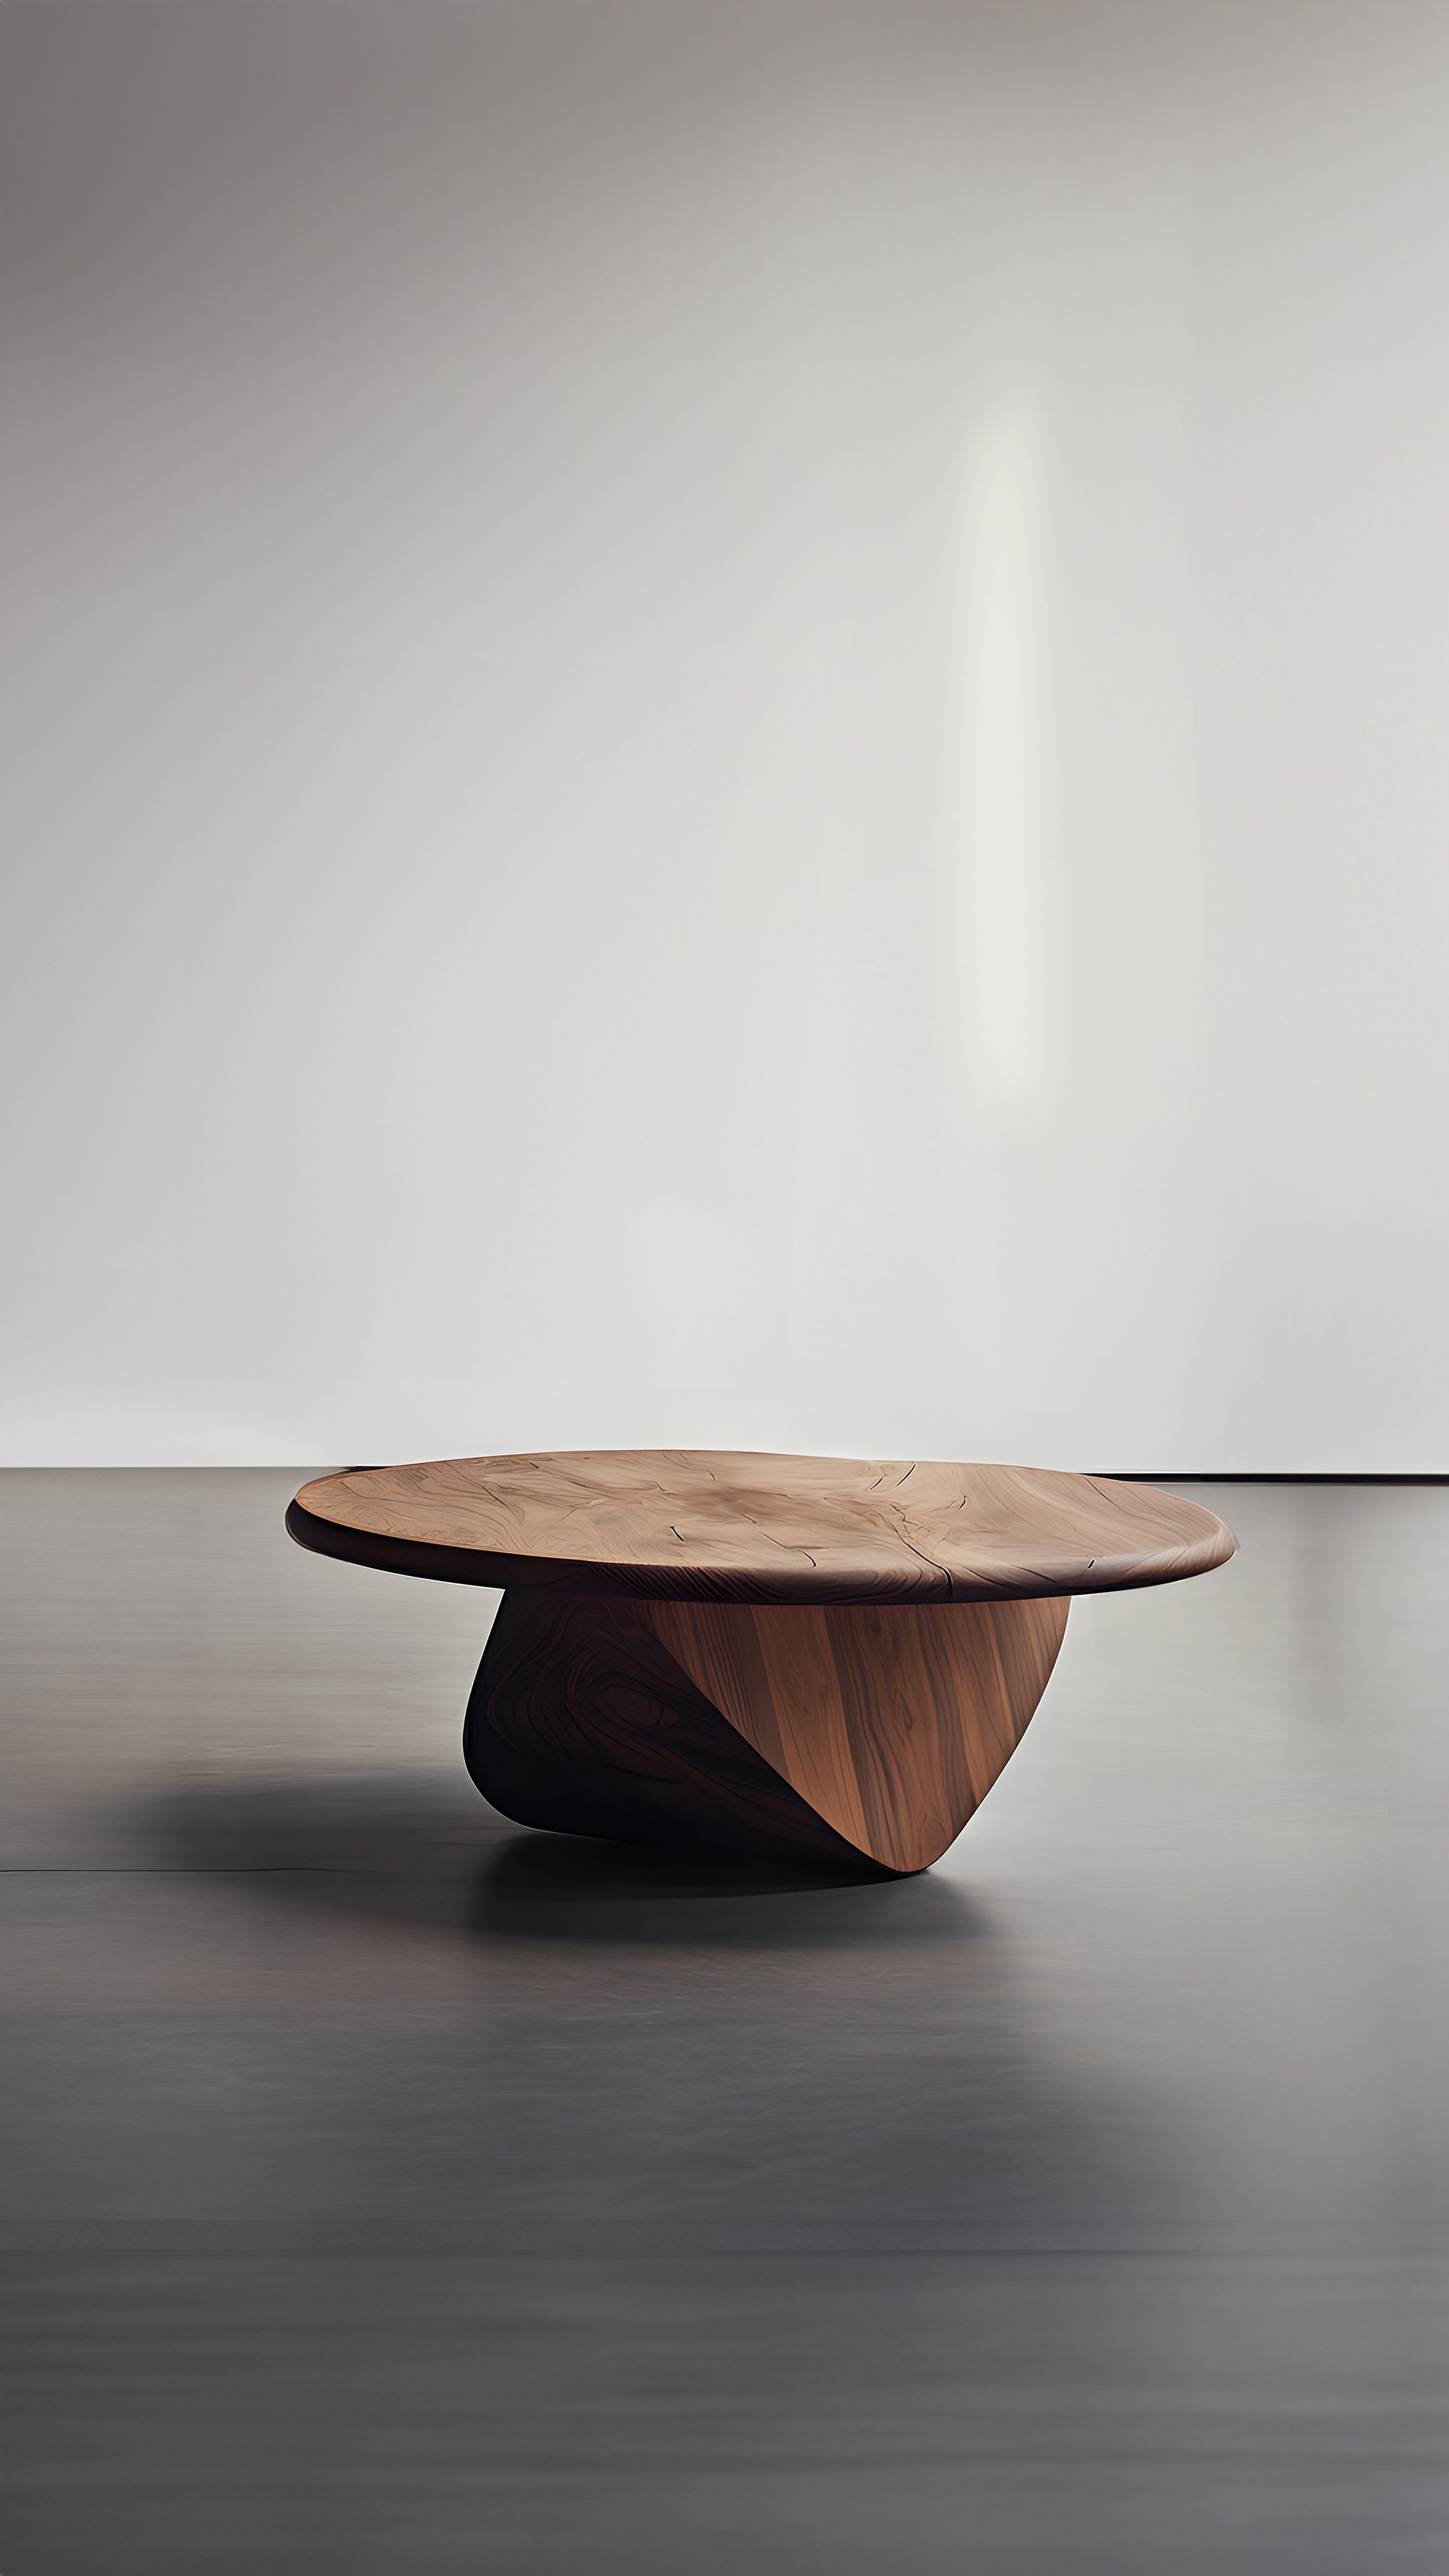 Sculptural Coffee Table Made of Solid Wood, Center Table Solace S38 by Joel Escalona — 8.jpg